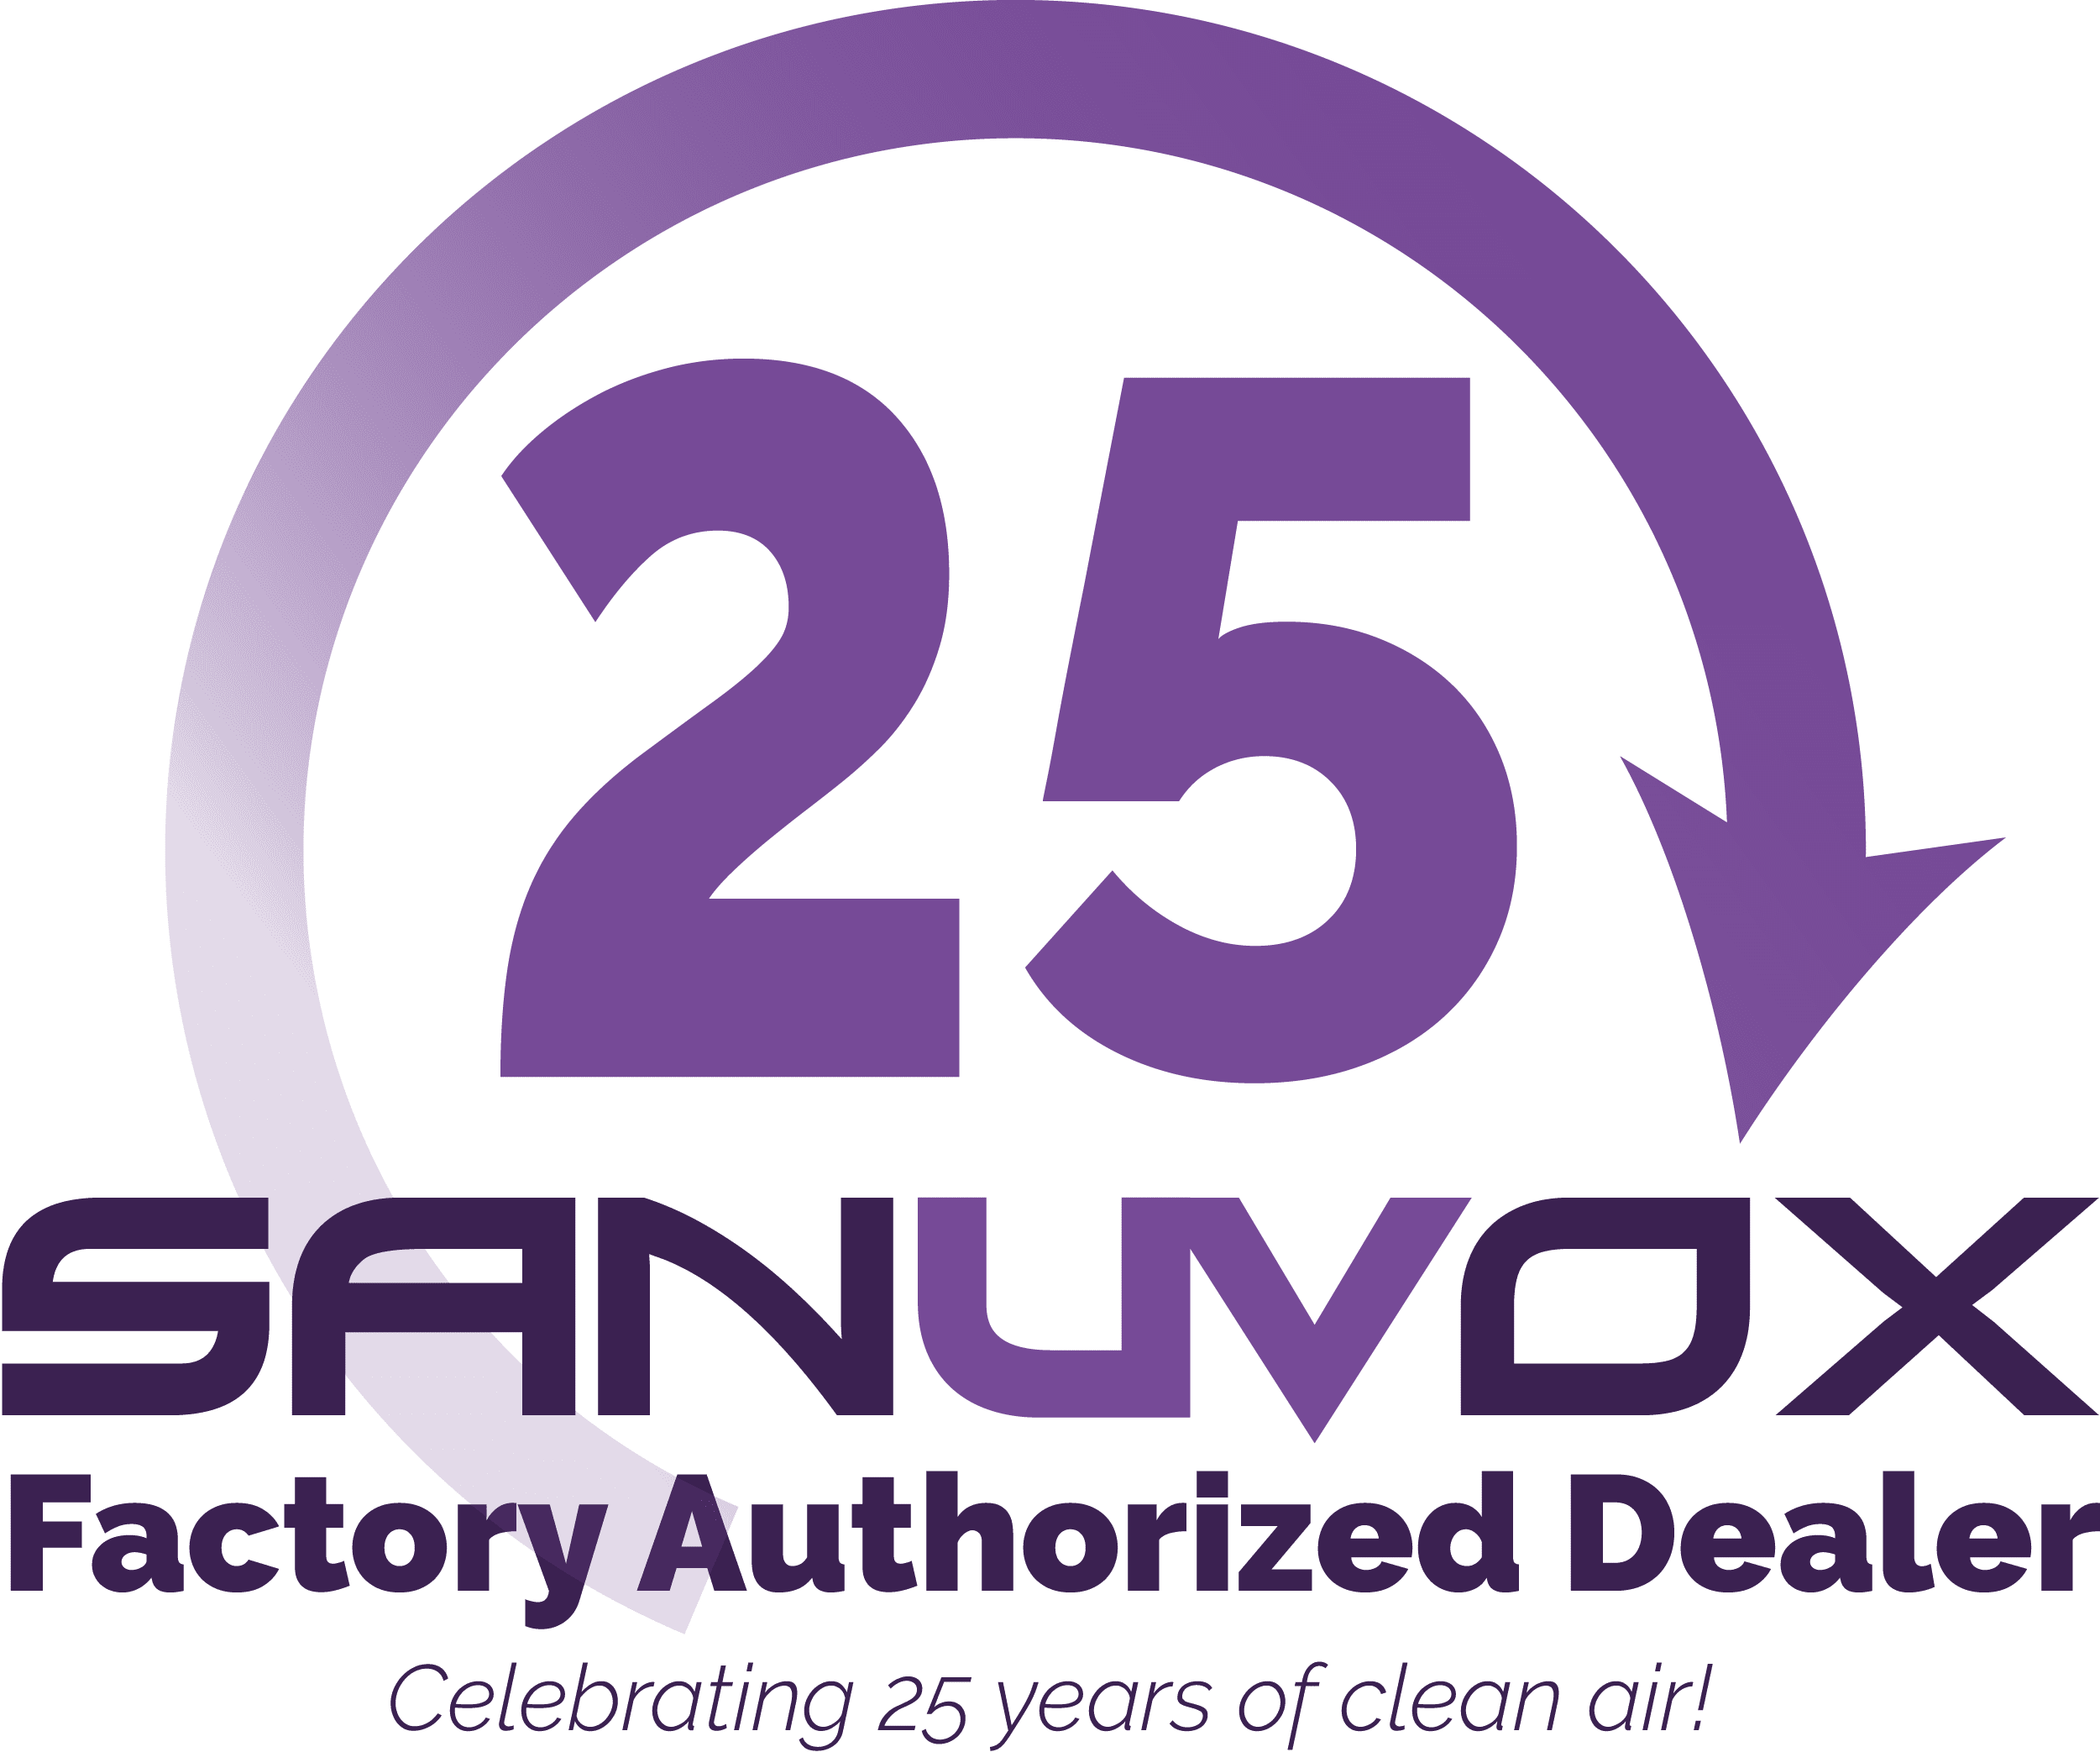 A graphic design showing that Sherwood Mechanical is a factory authorised dealer for Sanuvox, who is celebrating 25 years of service